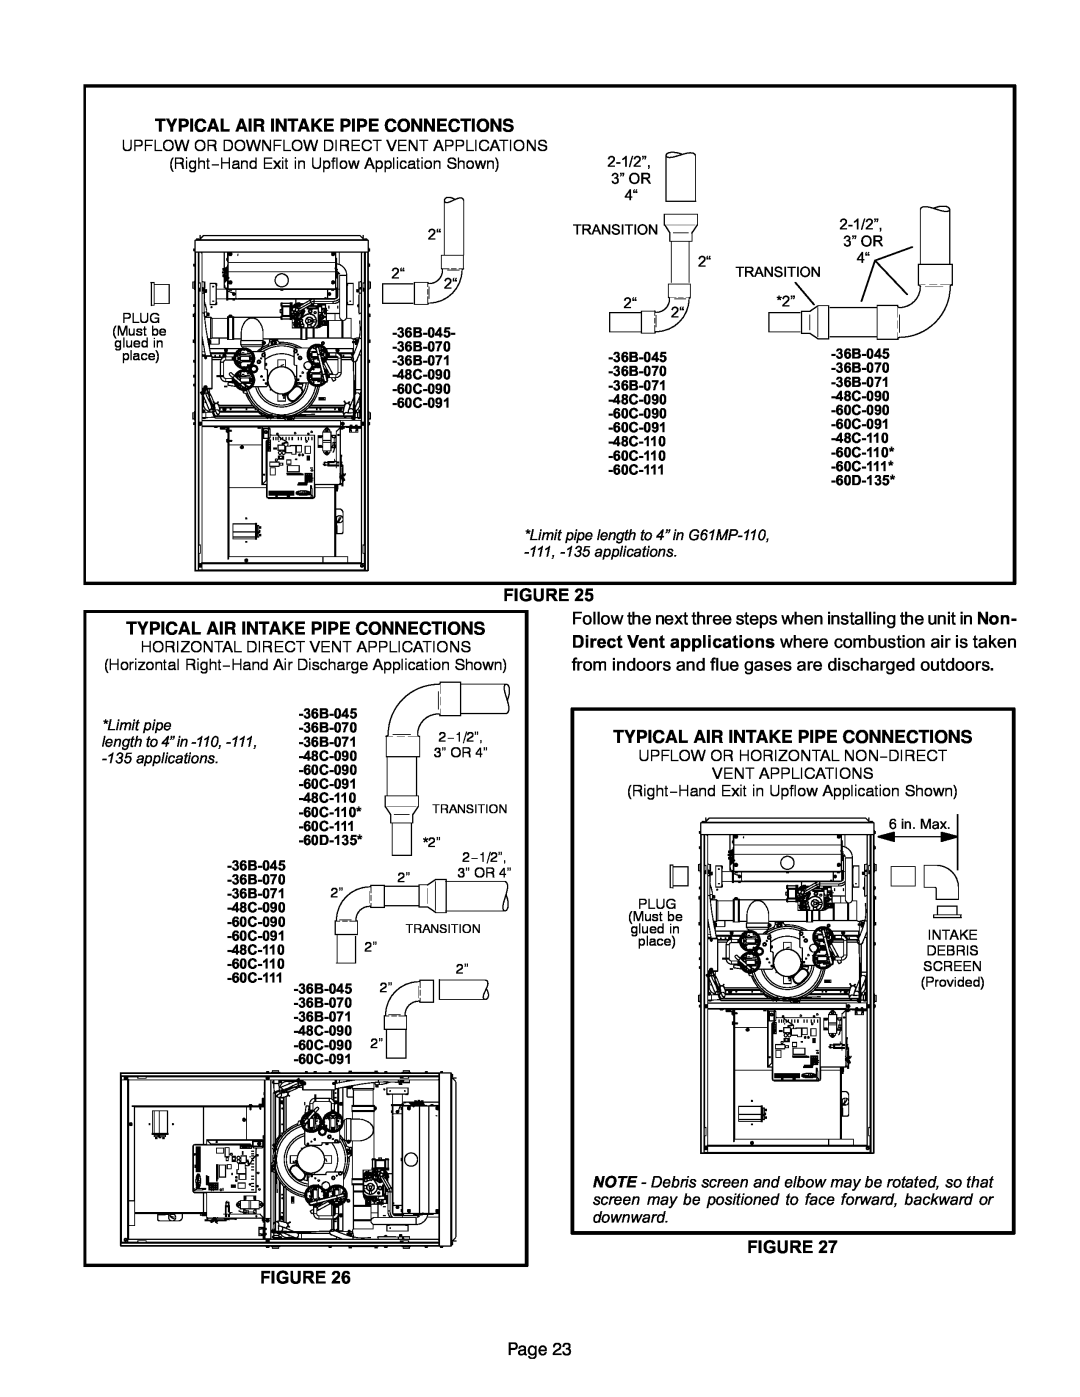 Lennox International Inc G61MP Series Units, Gas Units Typical Air Intake Pipe Connections, Figure Figure, Page 